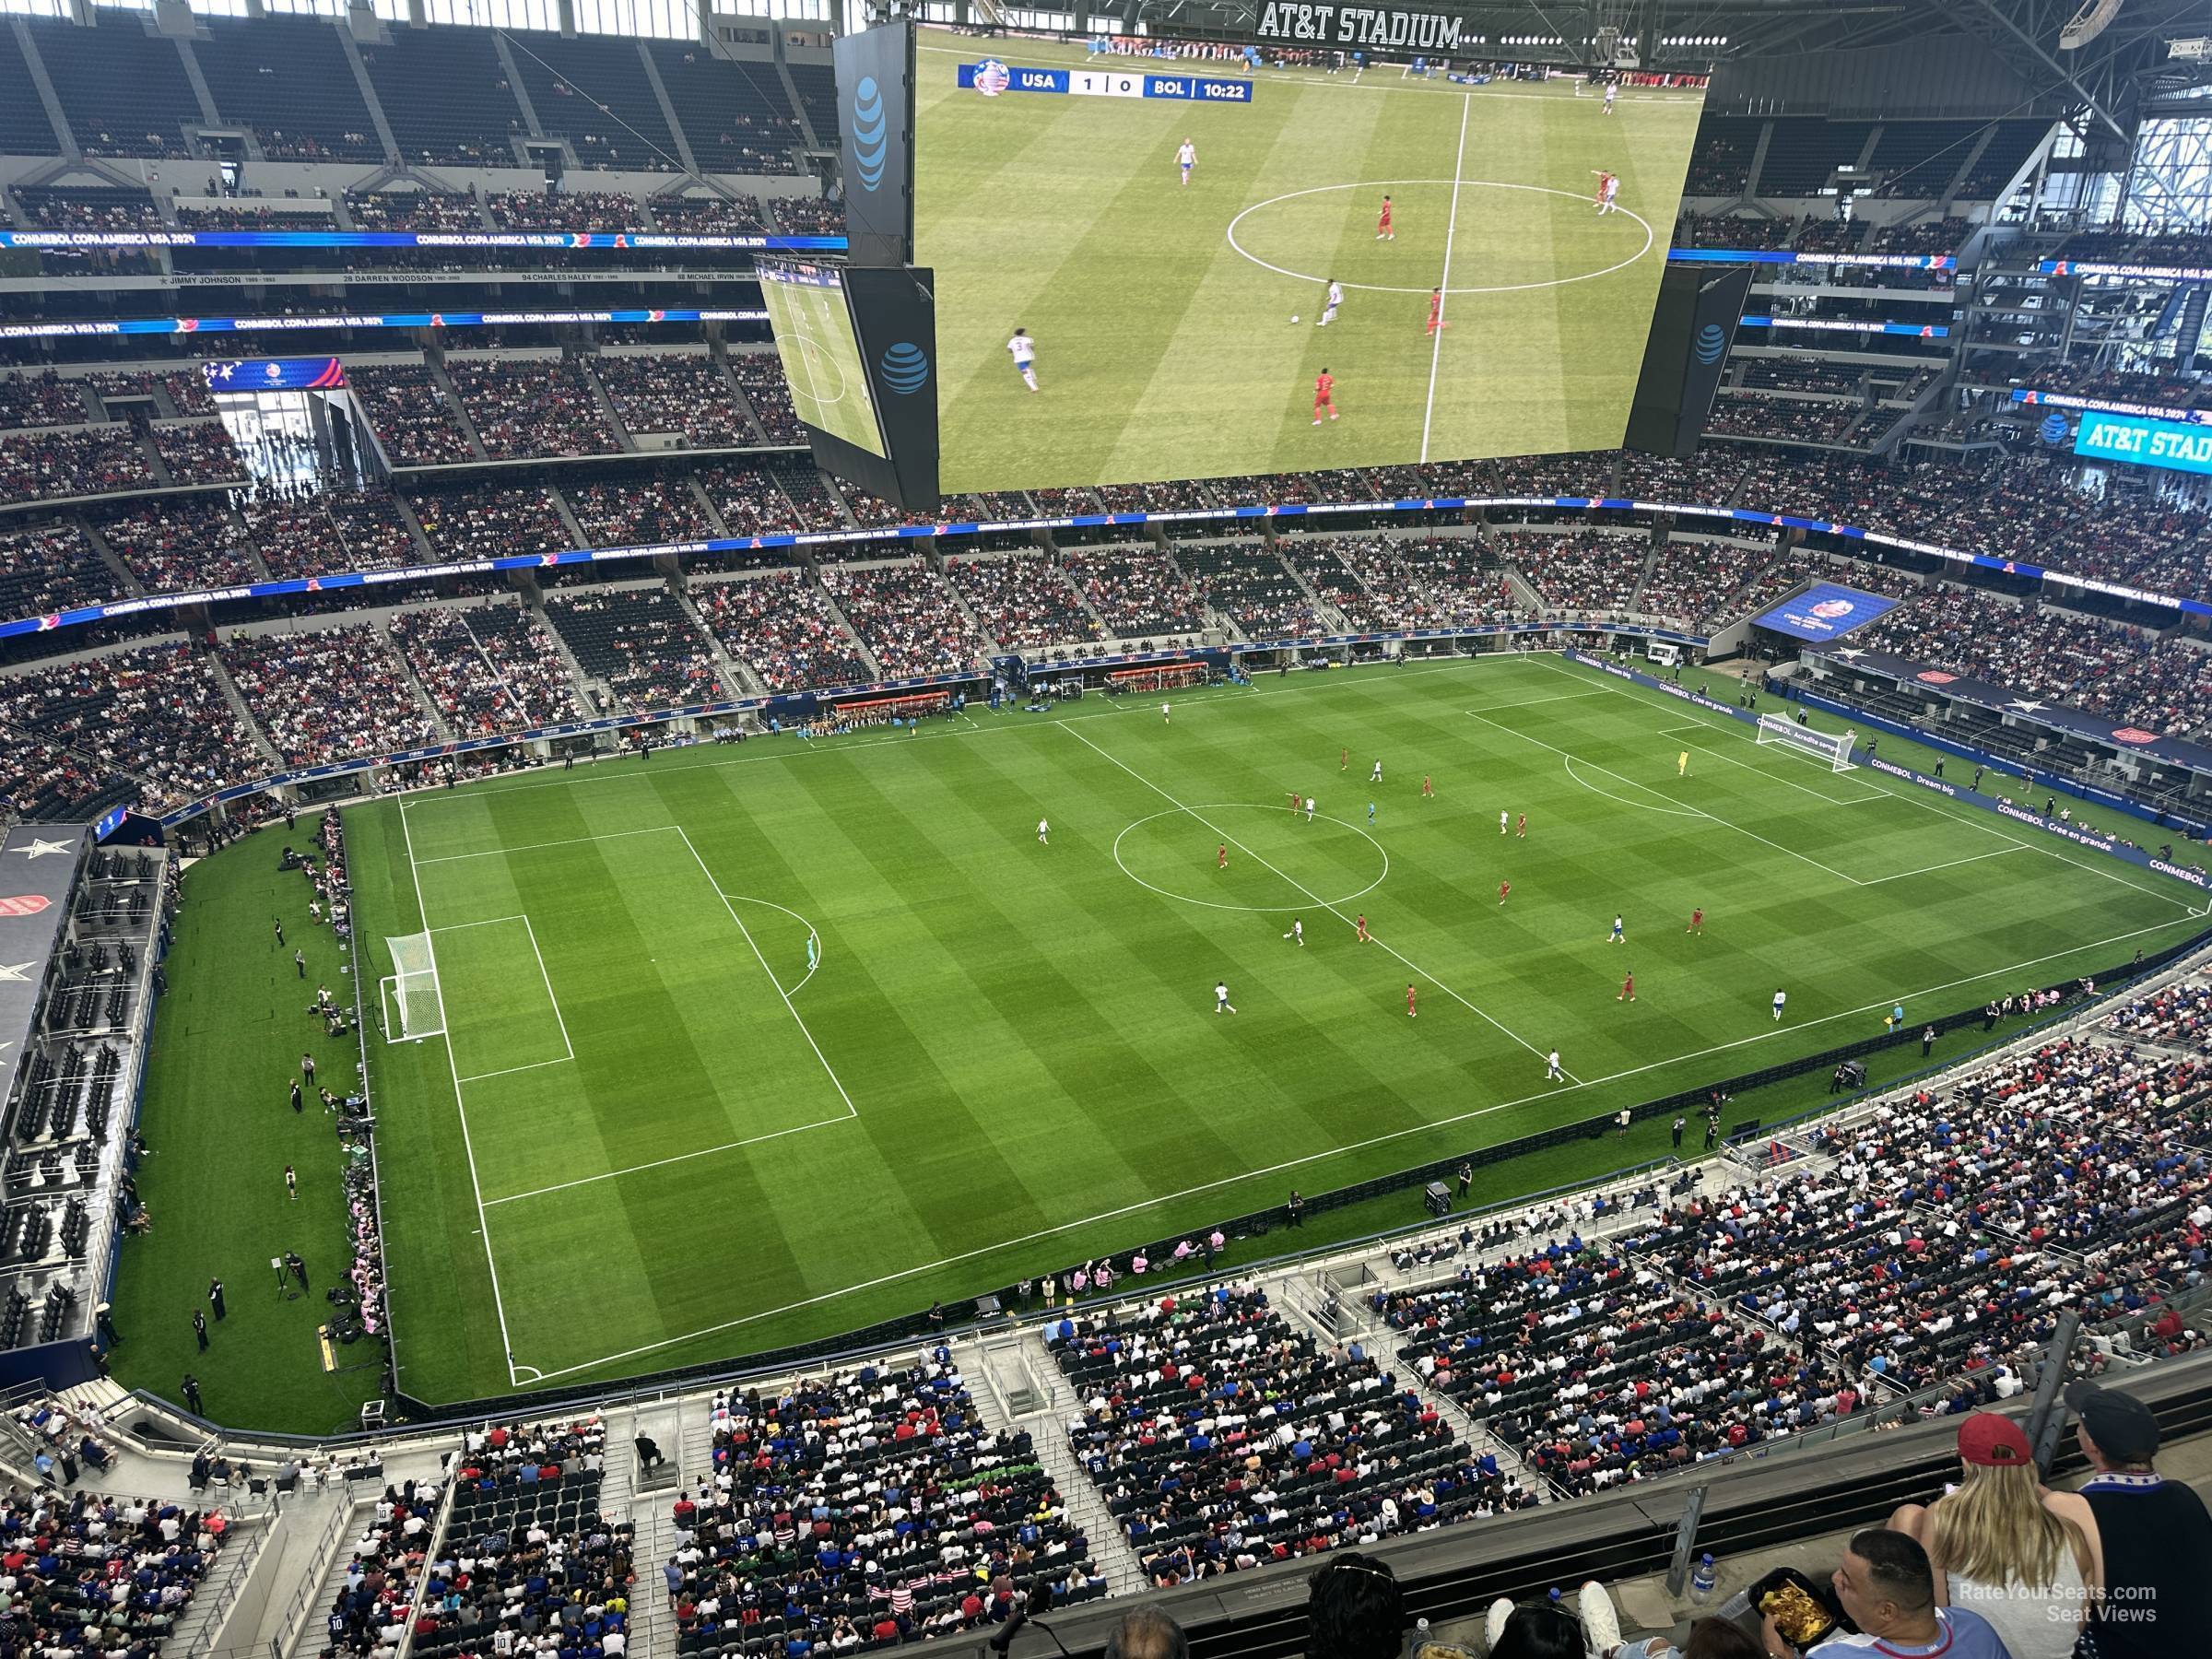 section 416, row 3 seat view  for soccer - at&t stadium (cowboys stadium)